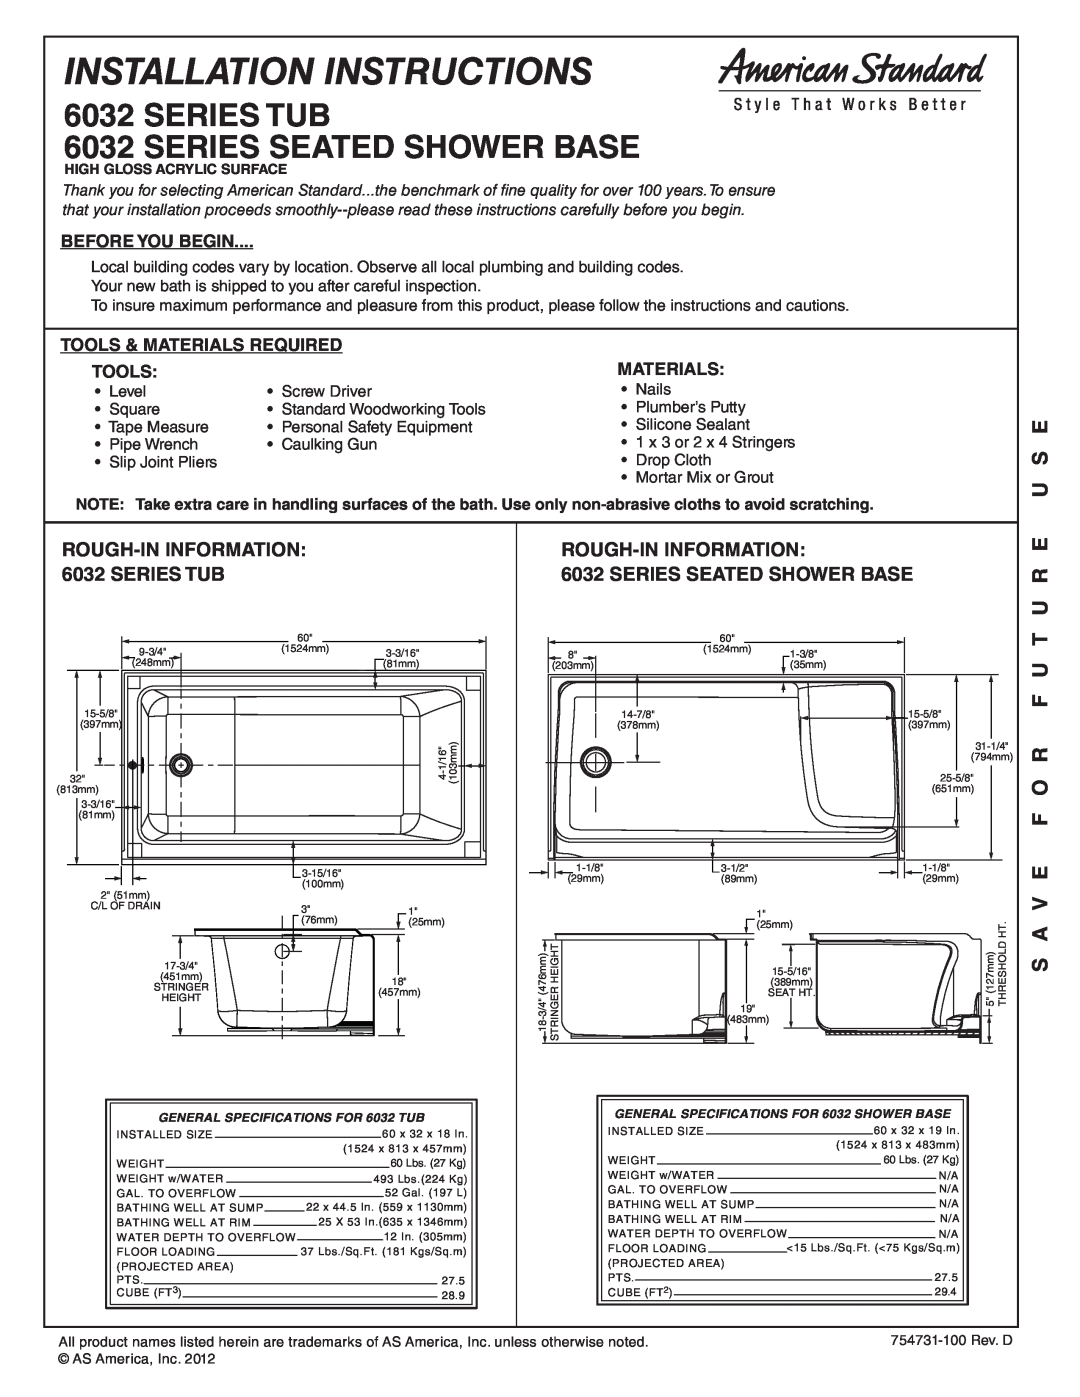 American Standard 6032 Series TUB installation instructions ROUGH-IN INFORMATION 6032 SERIES SEATED SHOWER BASE, U S E 